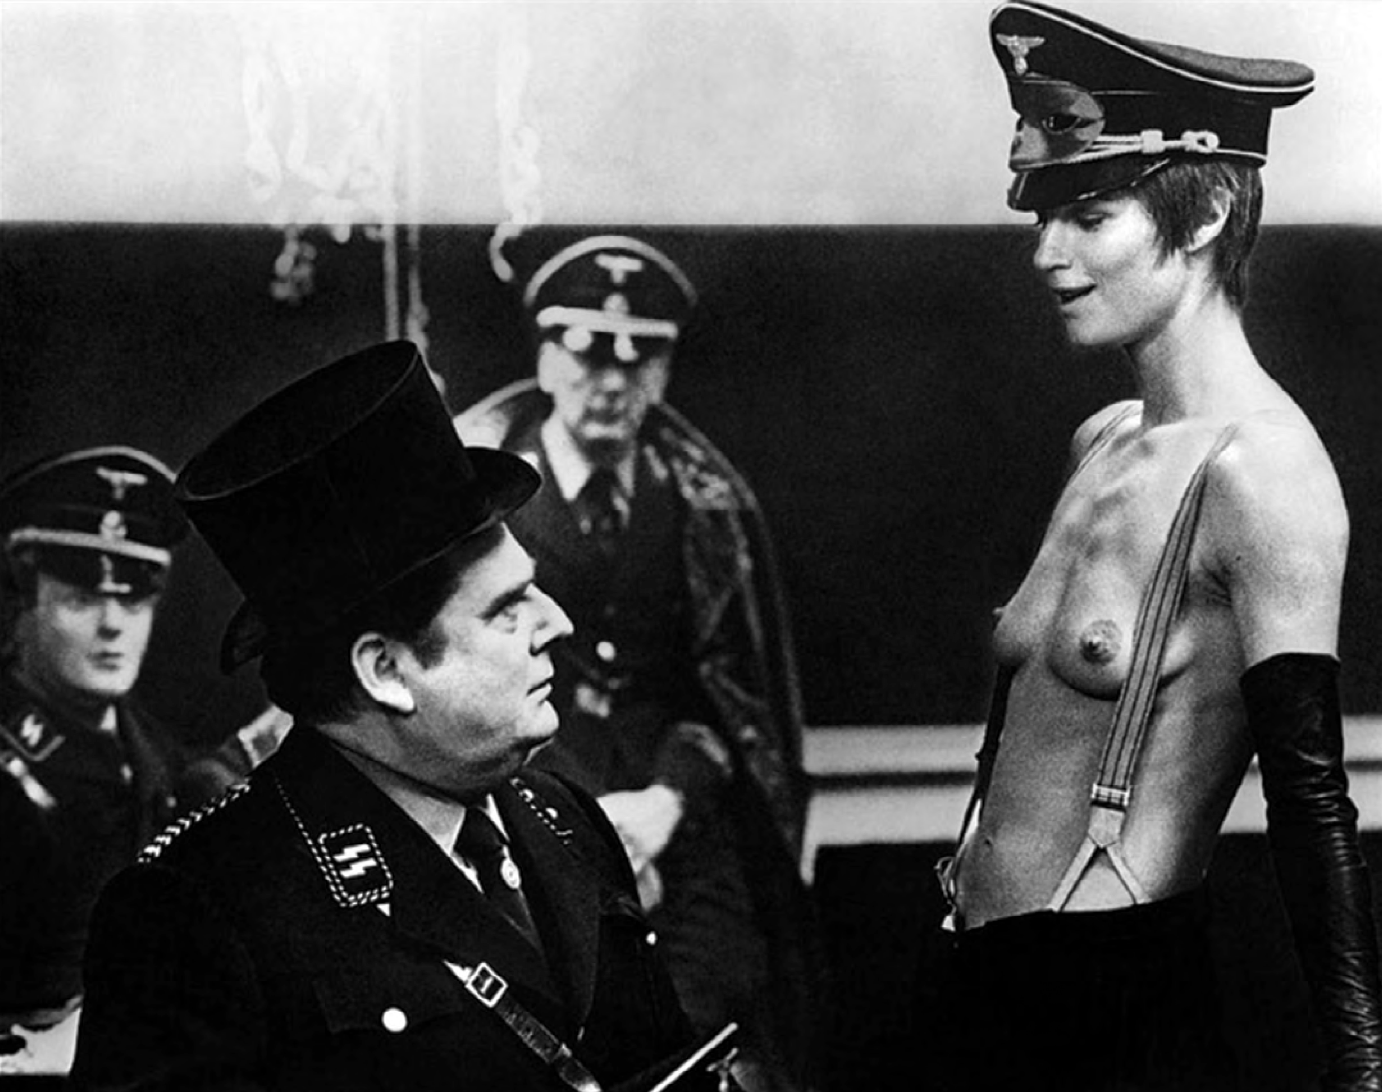 The Night Porter (film still), 1974. Directed by Liliana Cavani, distributed by The Criterion Collection. 118 minutes. Courtesy of the Internet.